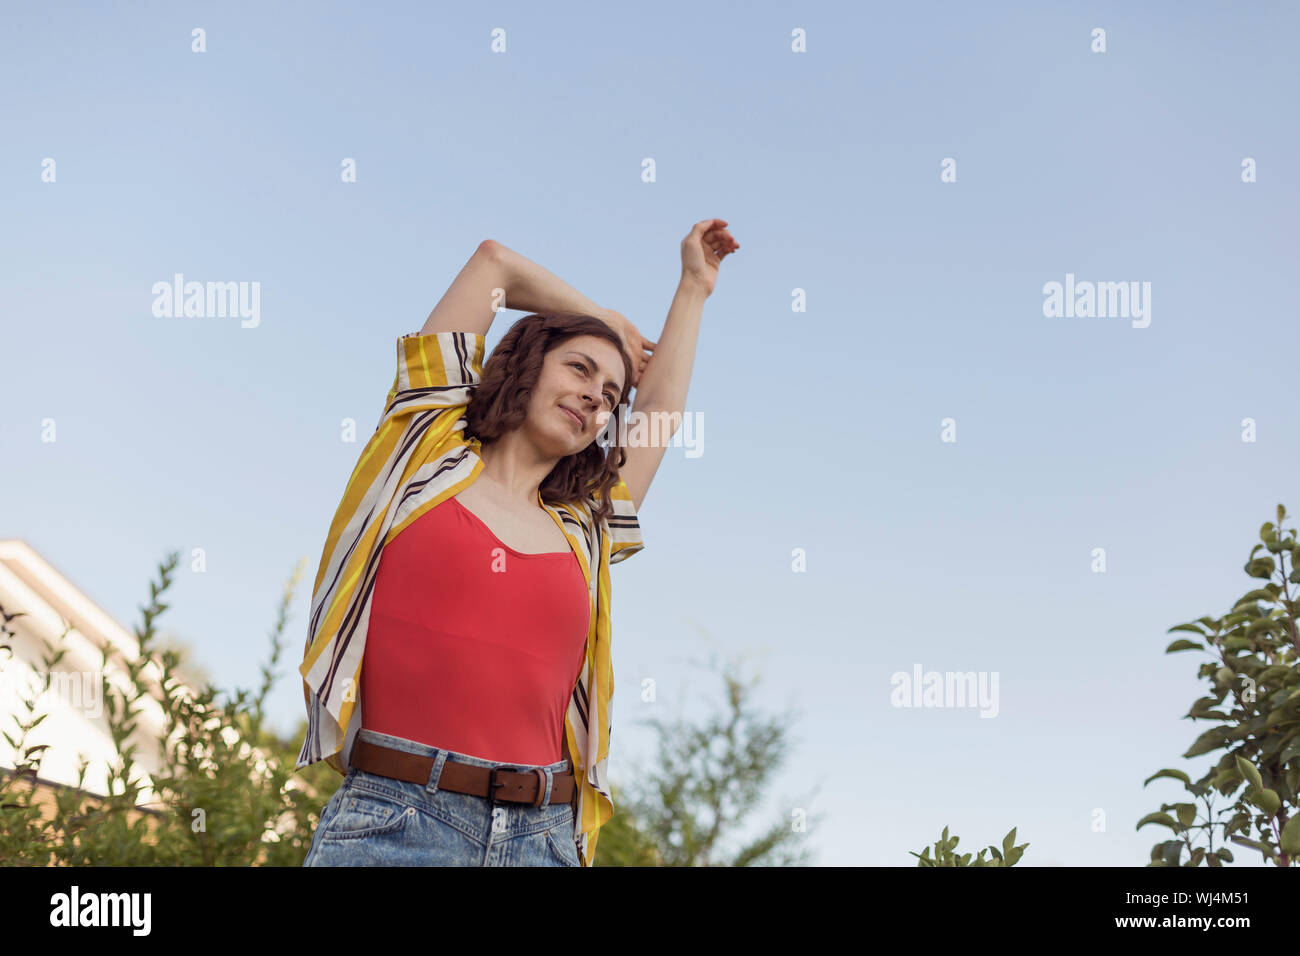 Carefree woman stretching arm overhead Stock Photo